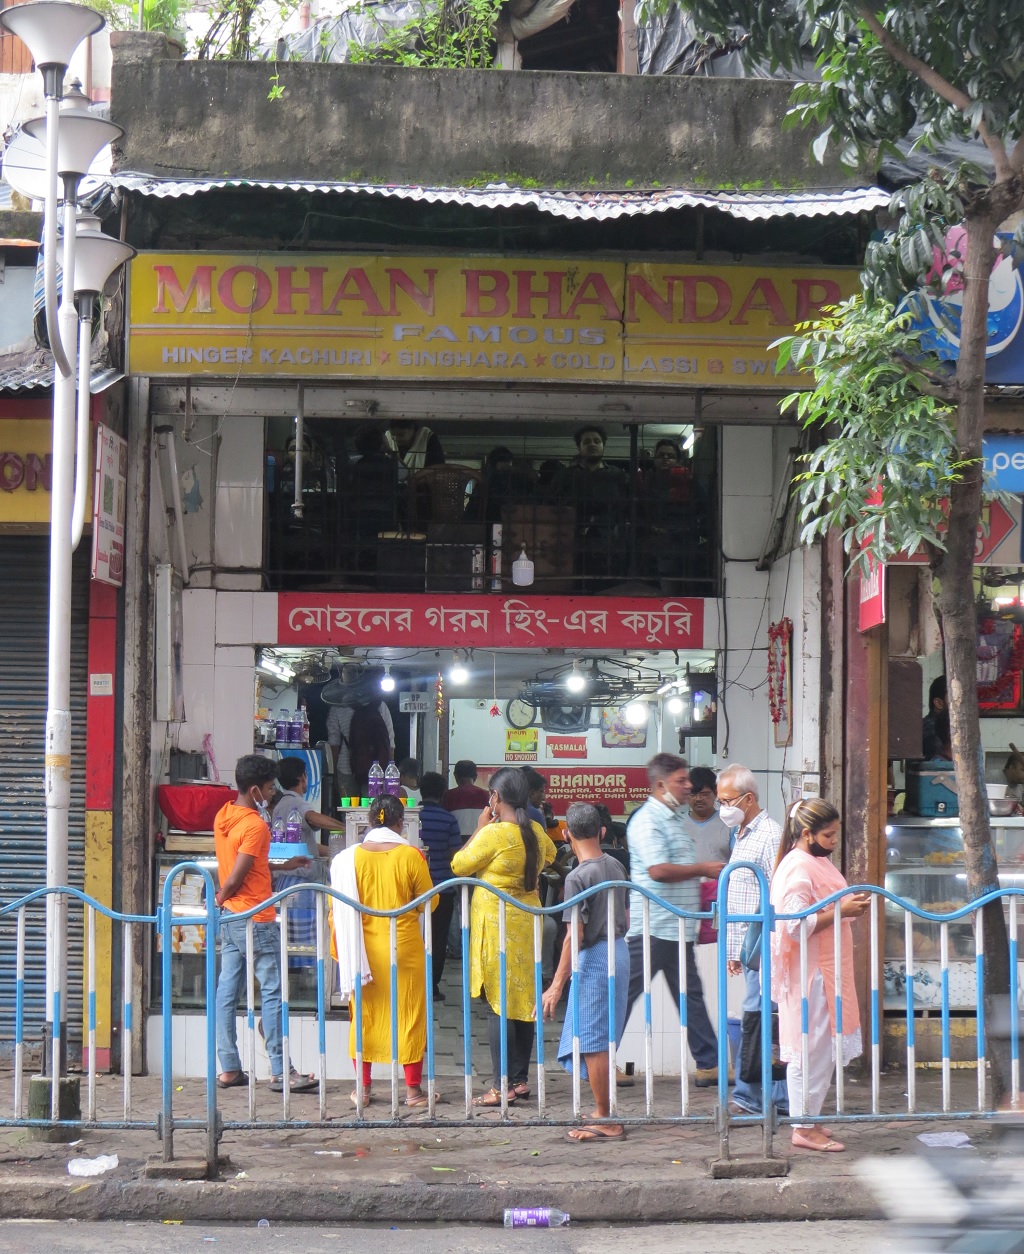 Mohan Bhandar – The Famous Snacks/Sweets/Tea Outlet Since 1925 Where The Movie ‘Piku’ was Shot